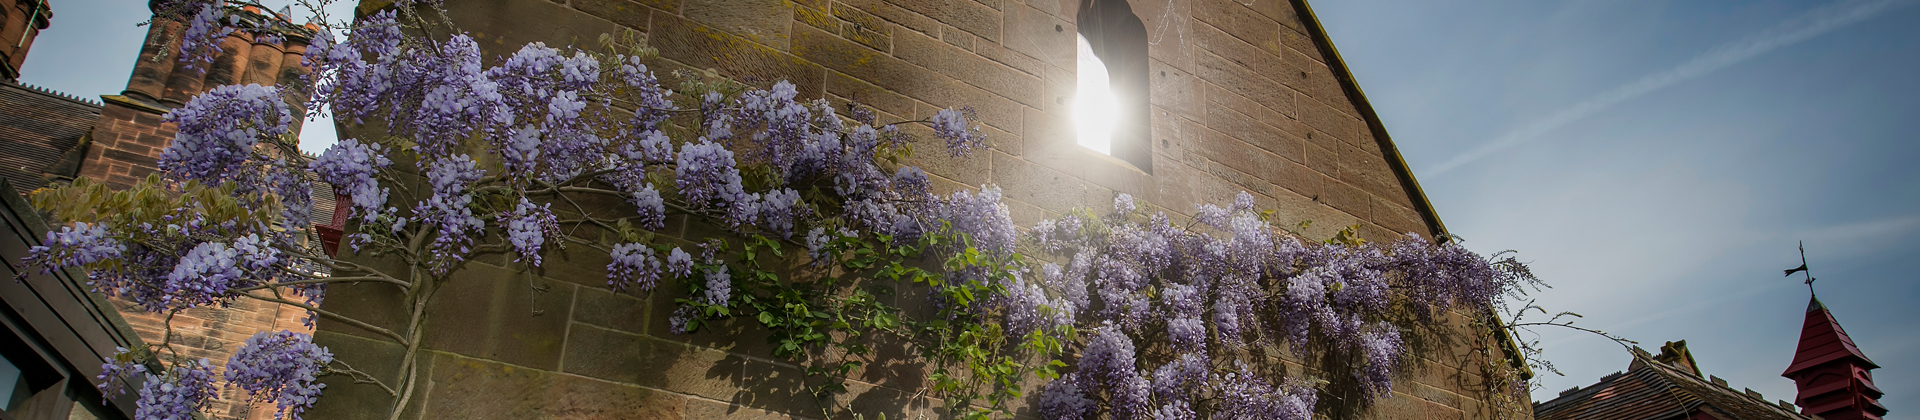 Wisteria on Buildings at Abbey Gate College